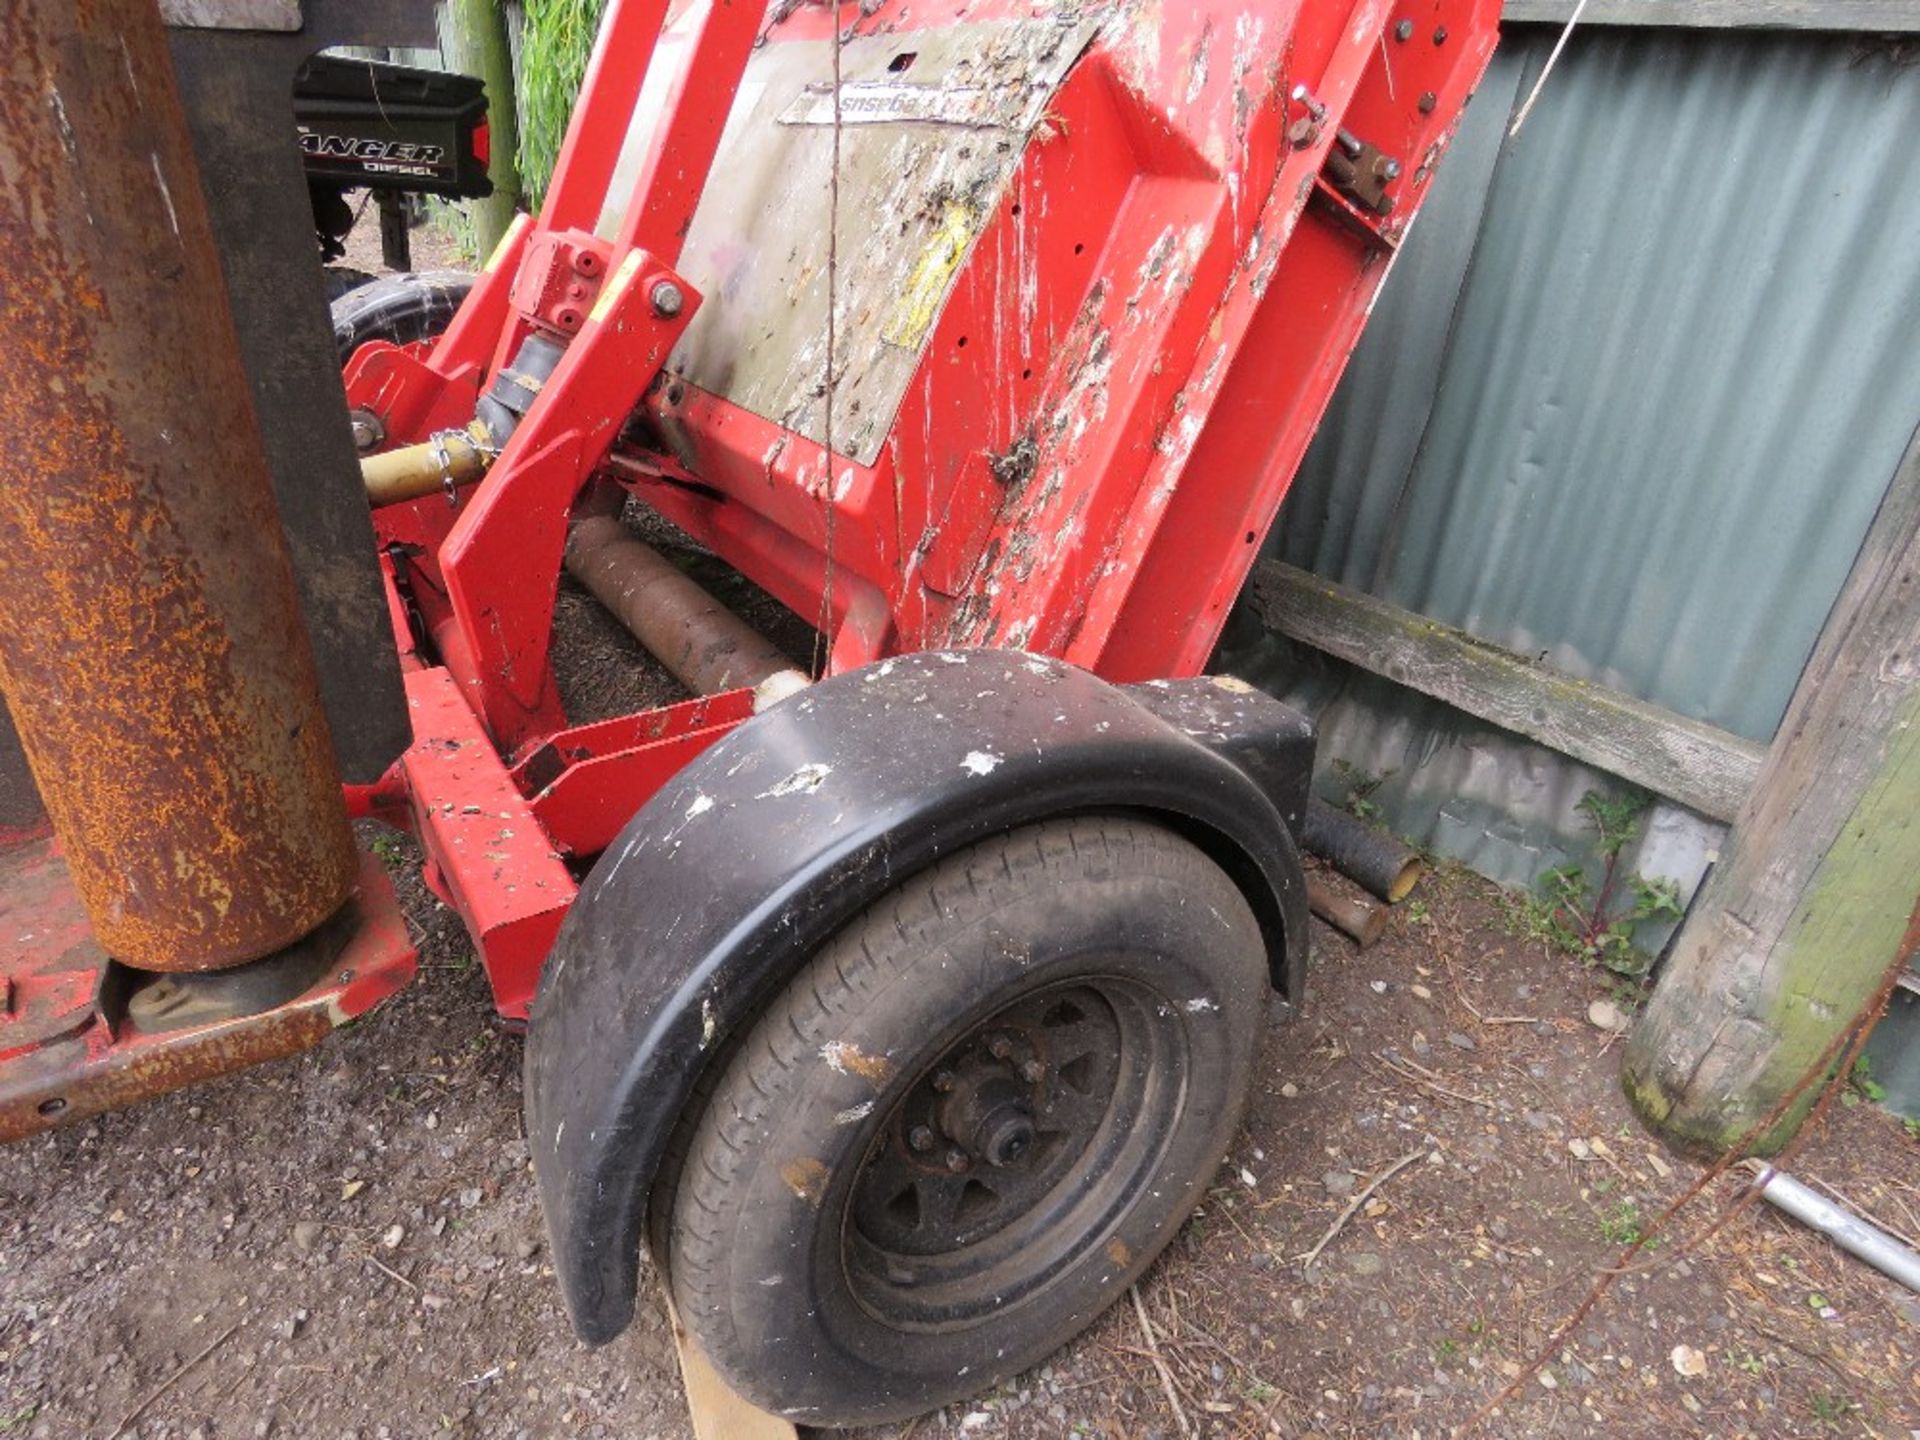 TRIMAX 728-610-400 BATWING TYPE ROLLER MOWER, YEAR 2017. PEGASUS S3 HEADS. NB: REQUIRES SOME REPAIR - Image 5 of 11